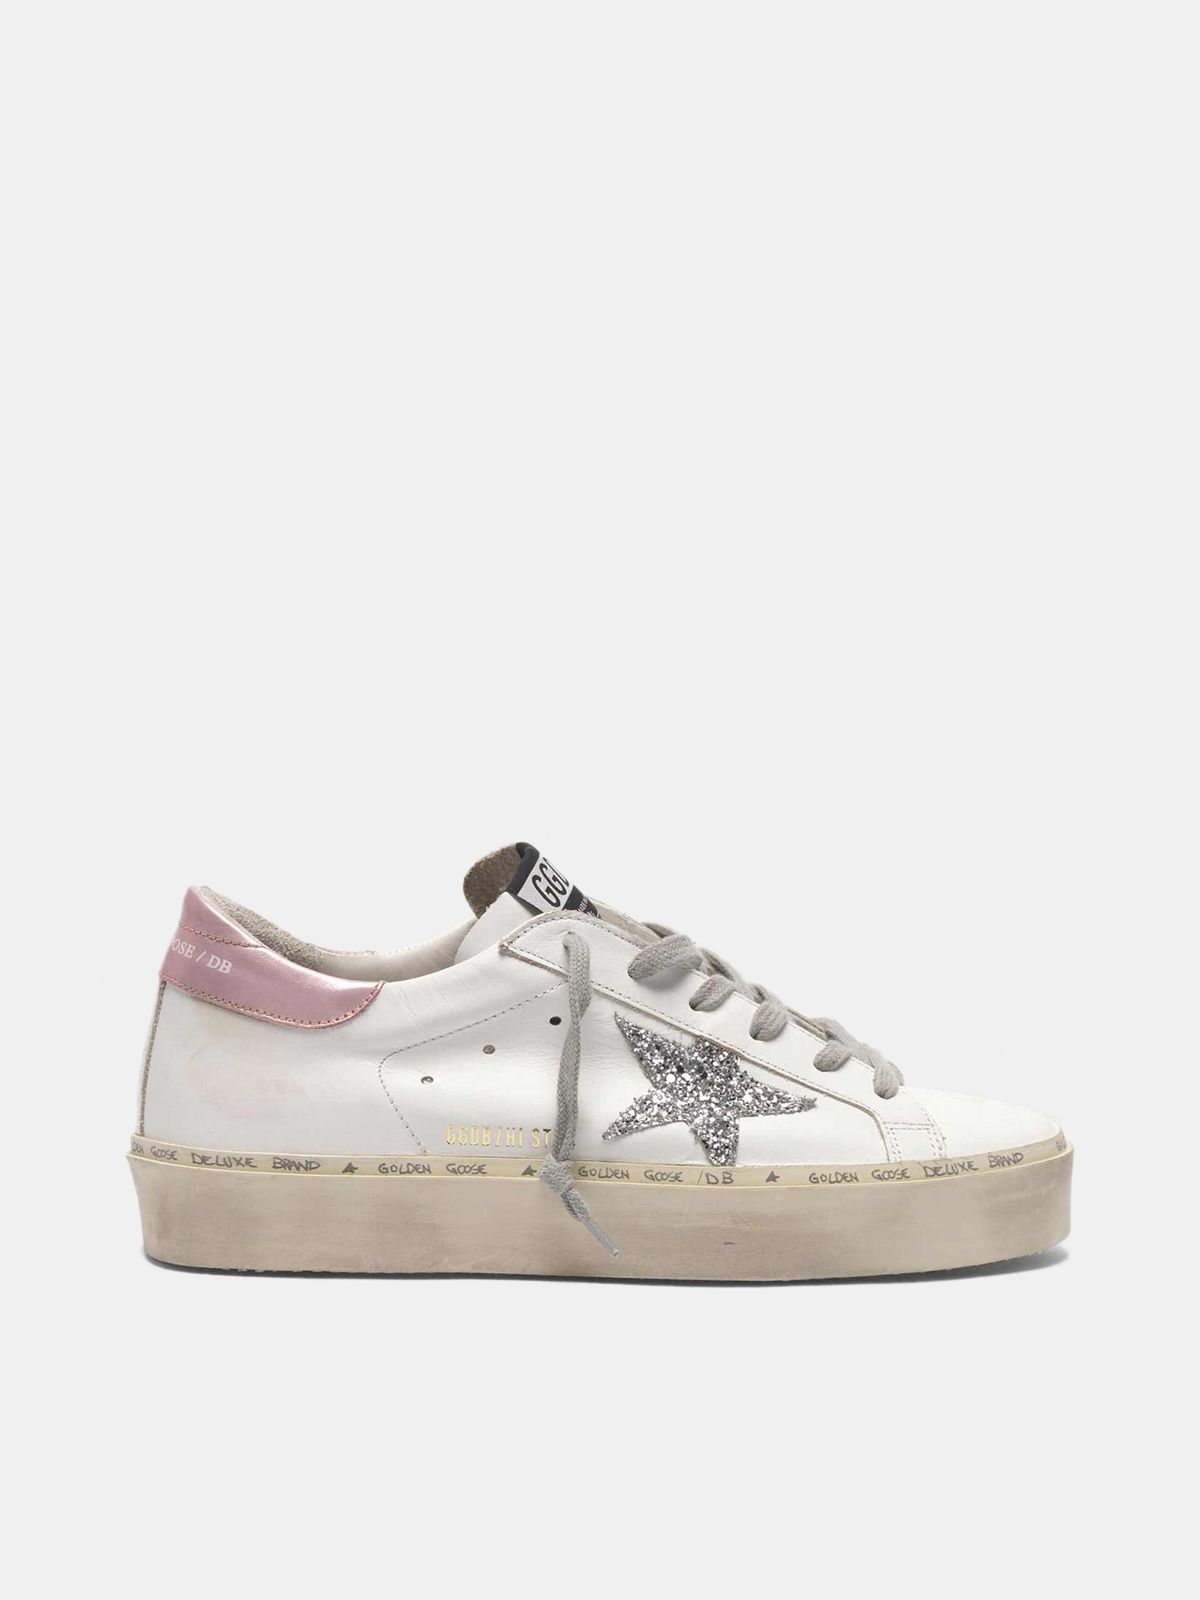 Sneakers Golden Goose Uomo Hi Star sneakers with glittery star and laminated heel tab